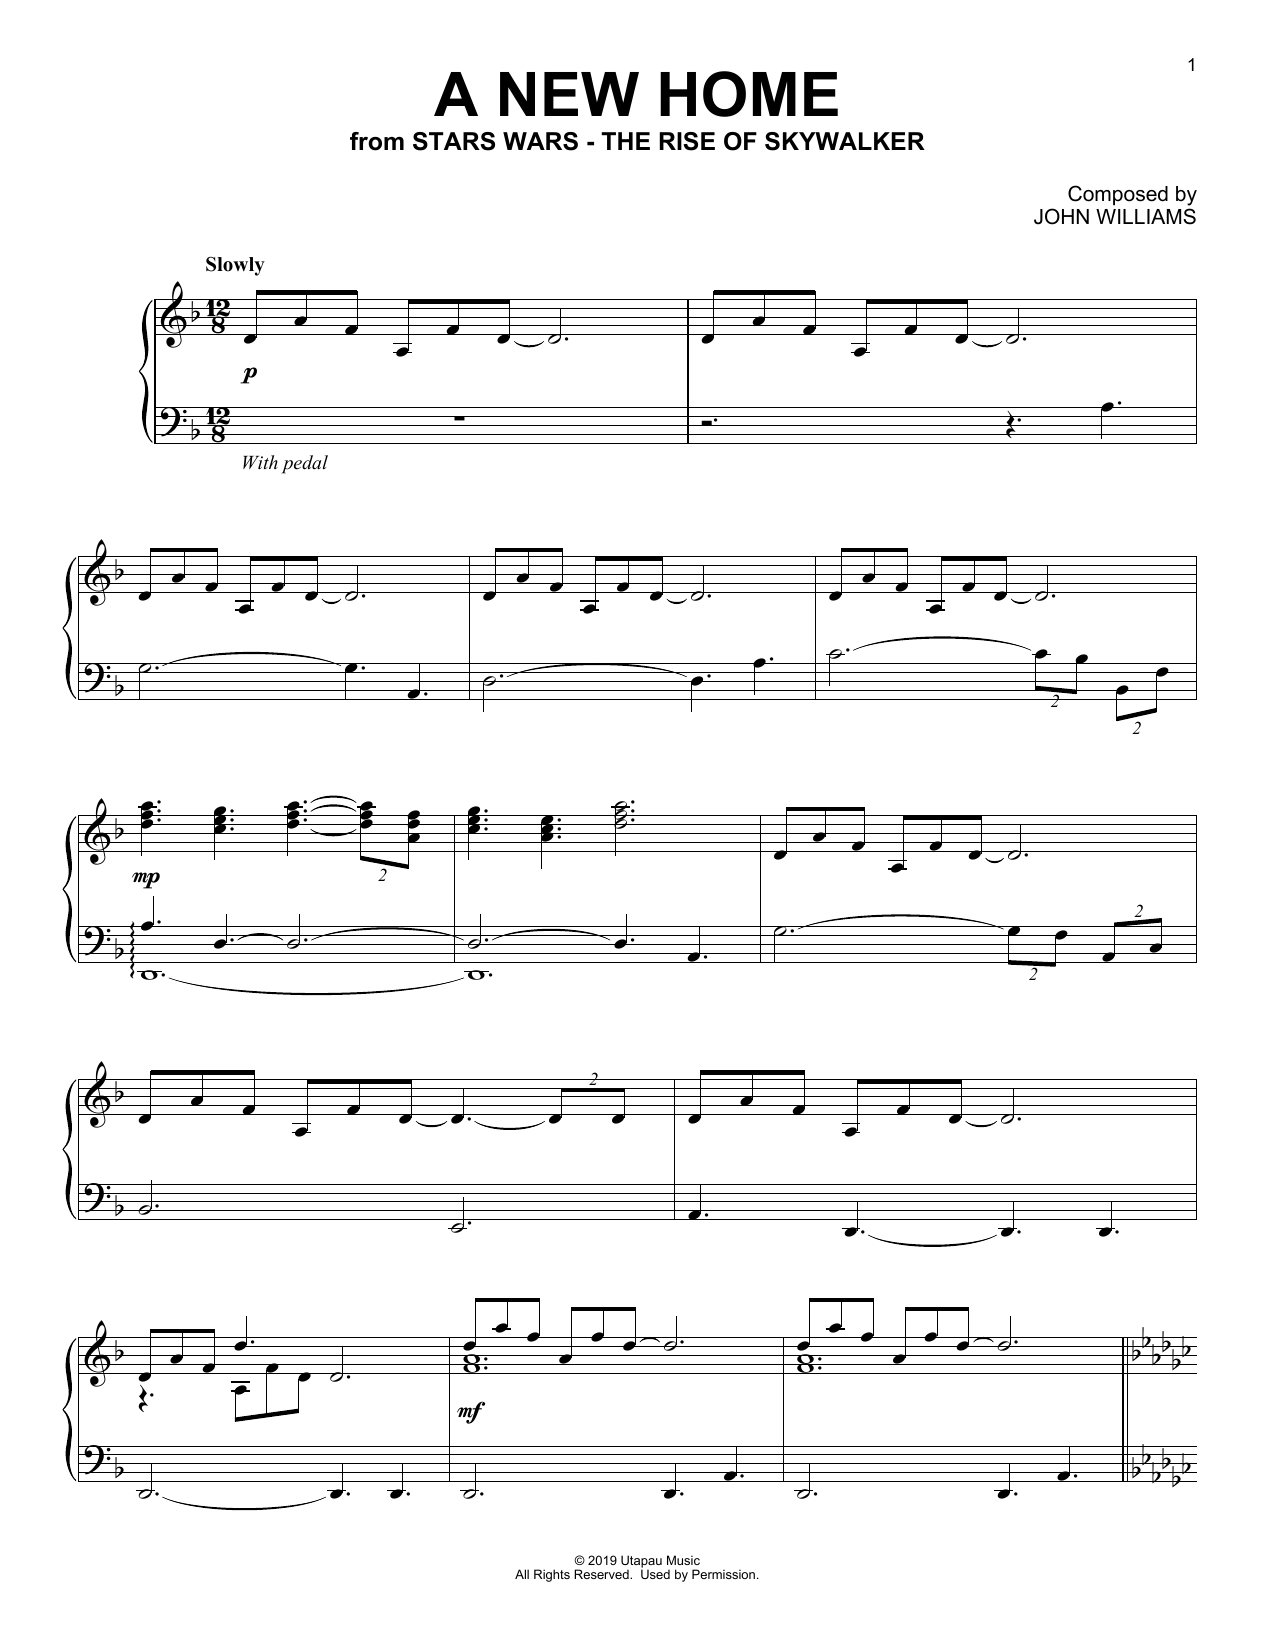 John Williams A New Home From The Rise Of Skywalker Sheet Music Pdf Notes Chords Disney Score Piano Solo Download Printable Sku 445355